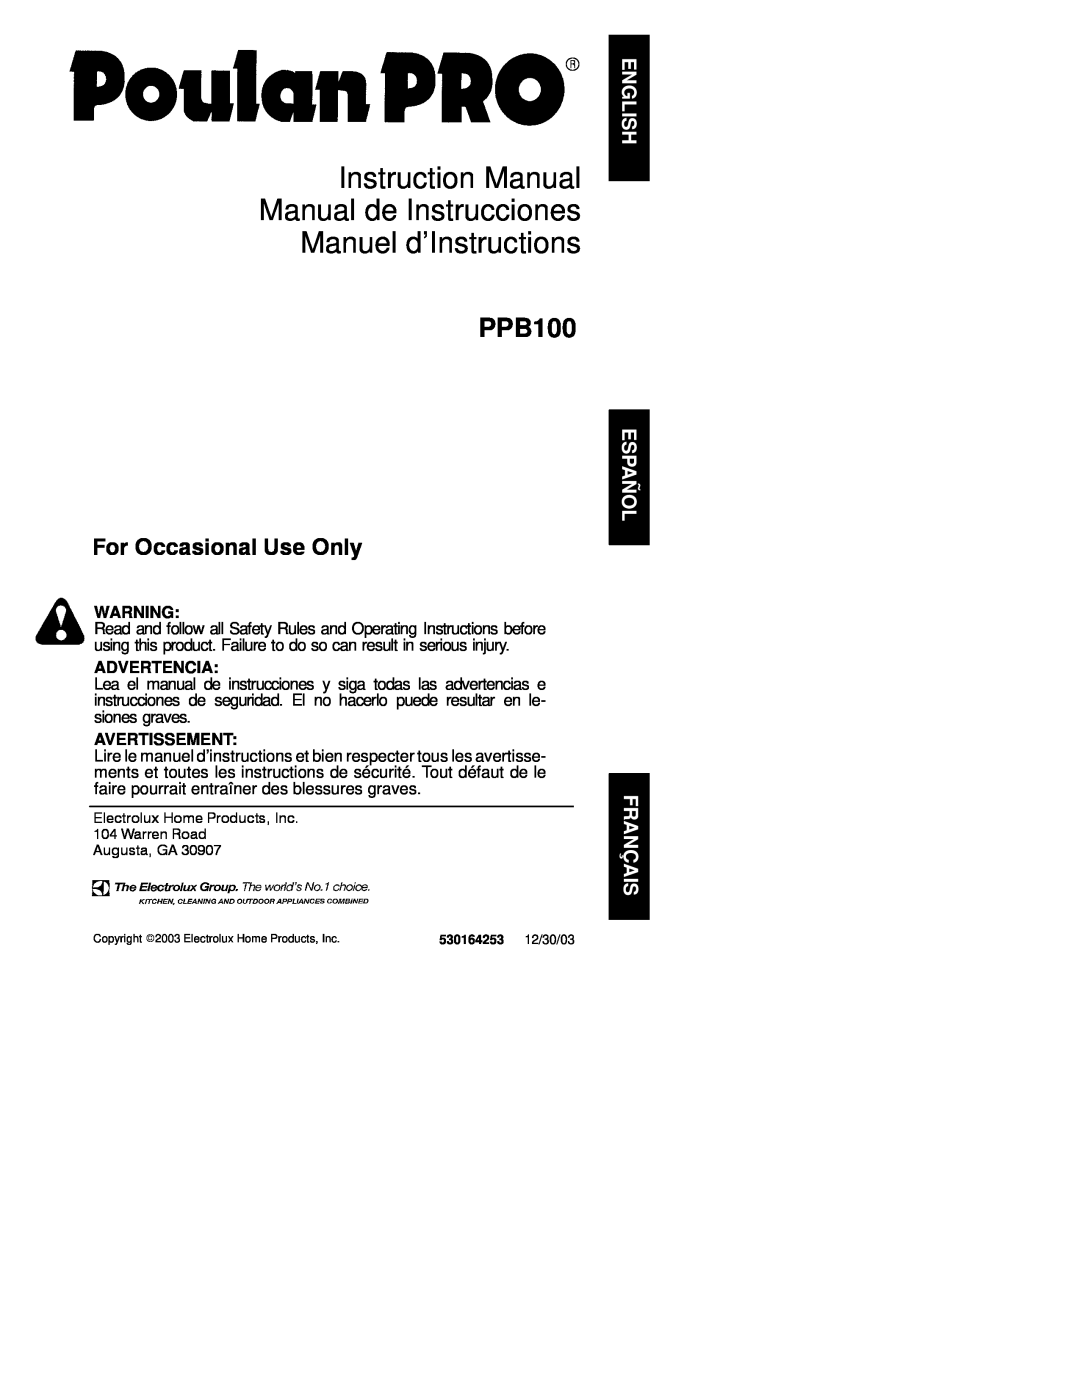 Poulan 530164253 instruction manual Advertencia, Avertissement, Manuel d’Instructions, PPB100, For Occasional Use Only 